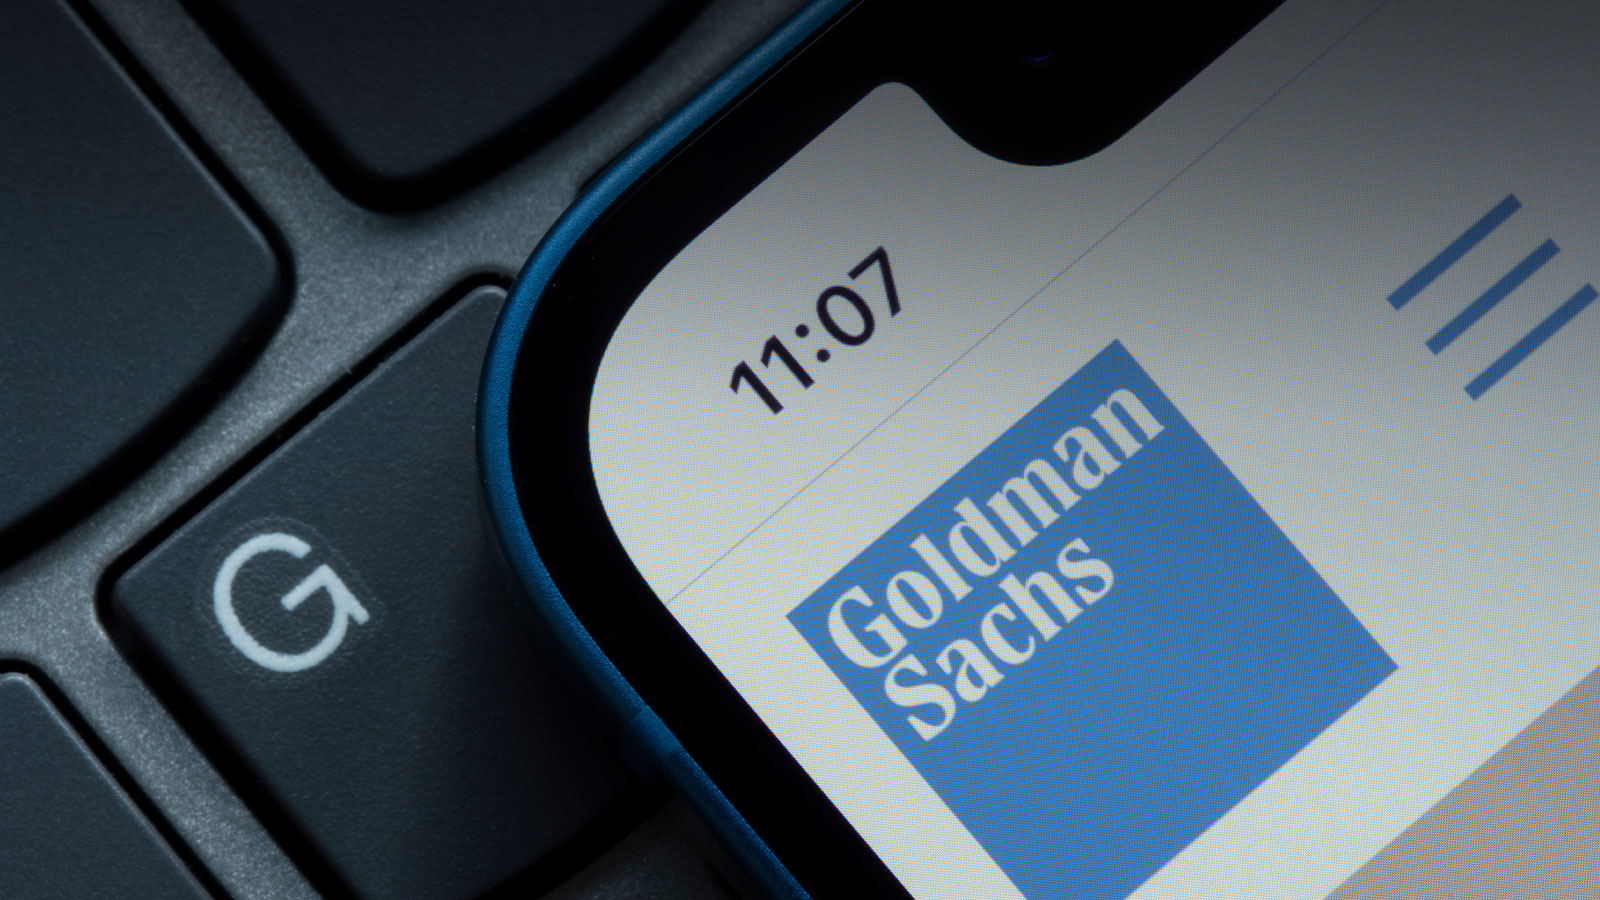 Goldman Sachs to Classify XRP, Shiba Inu, and Other Cryptocurrencies